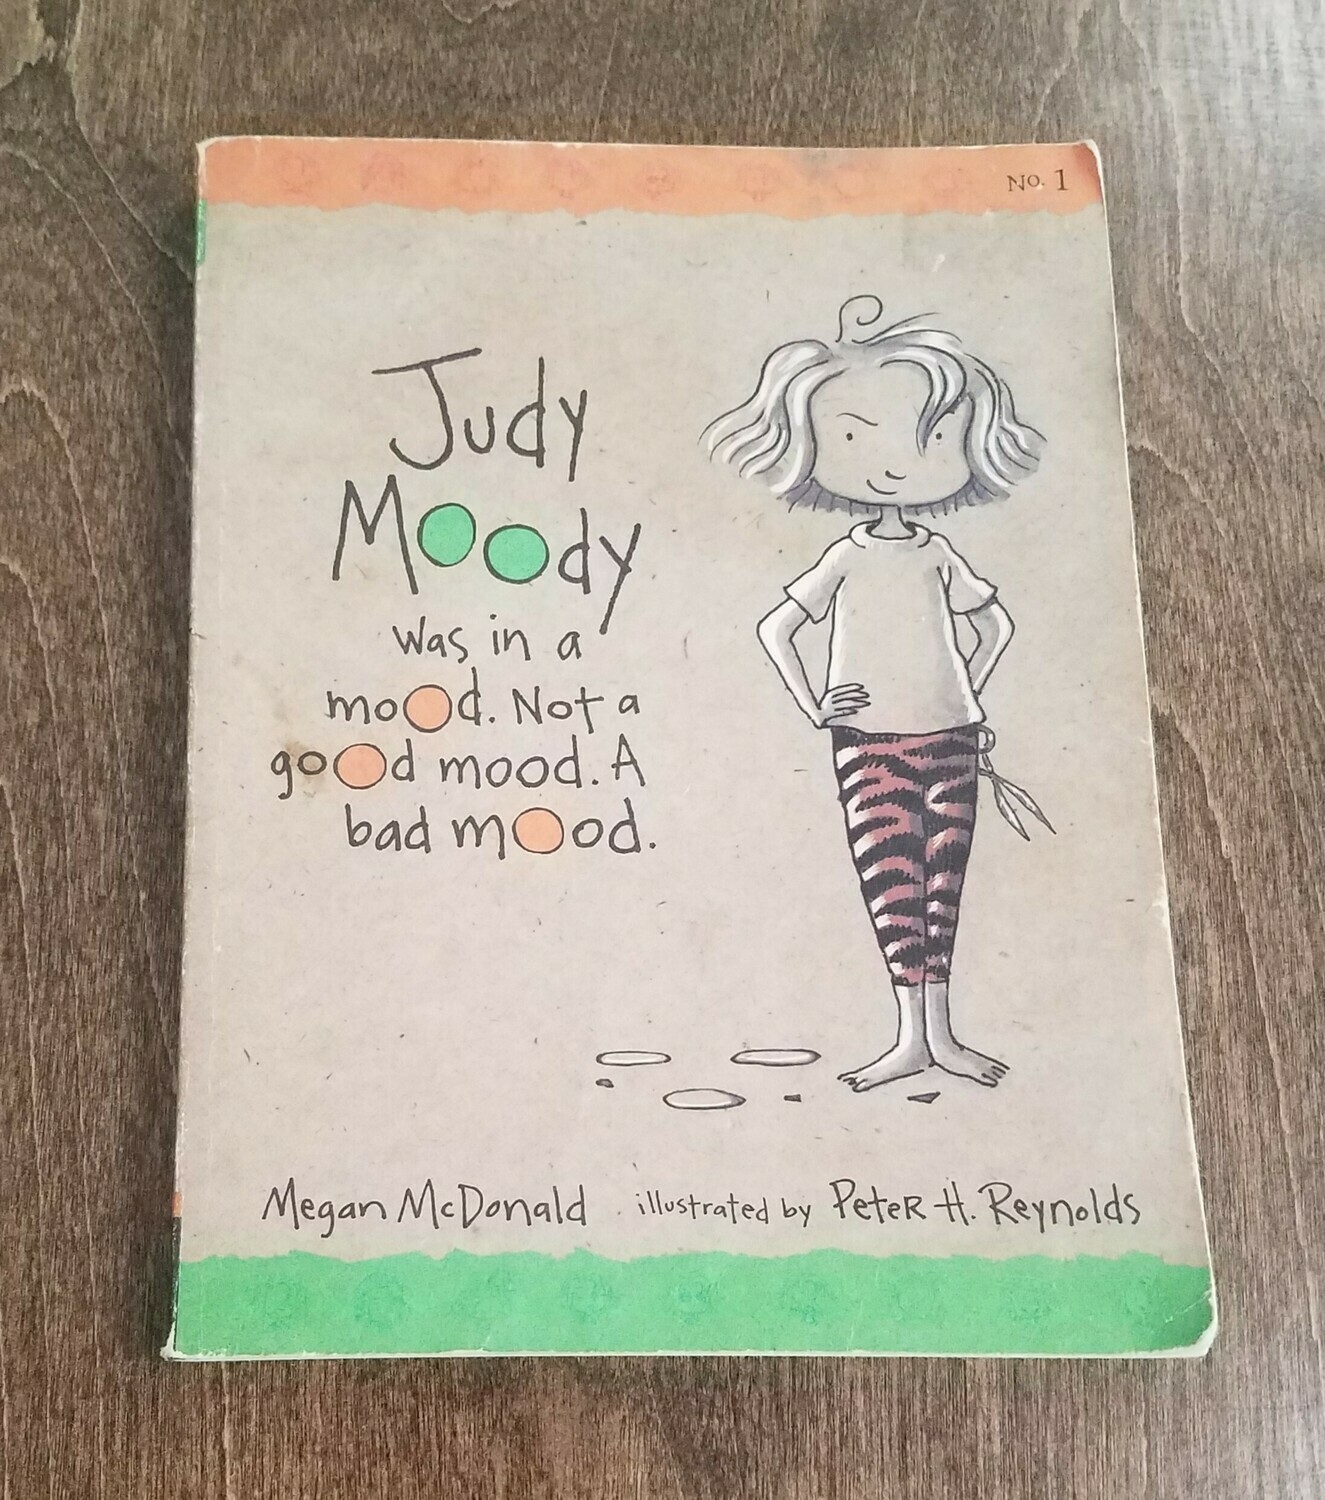 Judy Moody was in a Mood. Not a Good Mood. A Bad Mood by Megan McDonald and Peter H. Reynolds